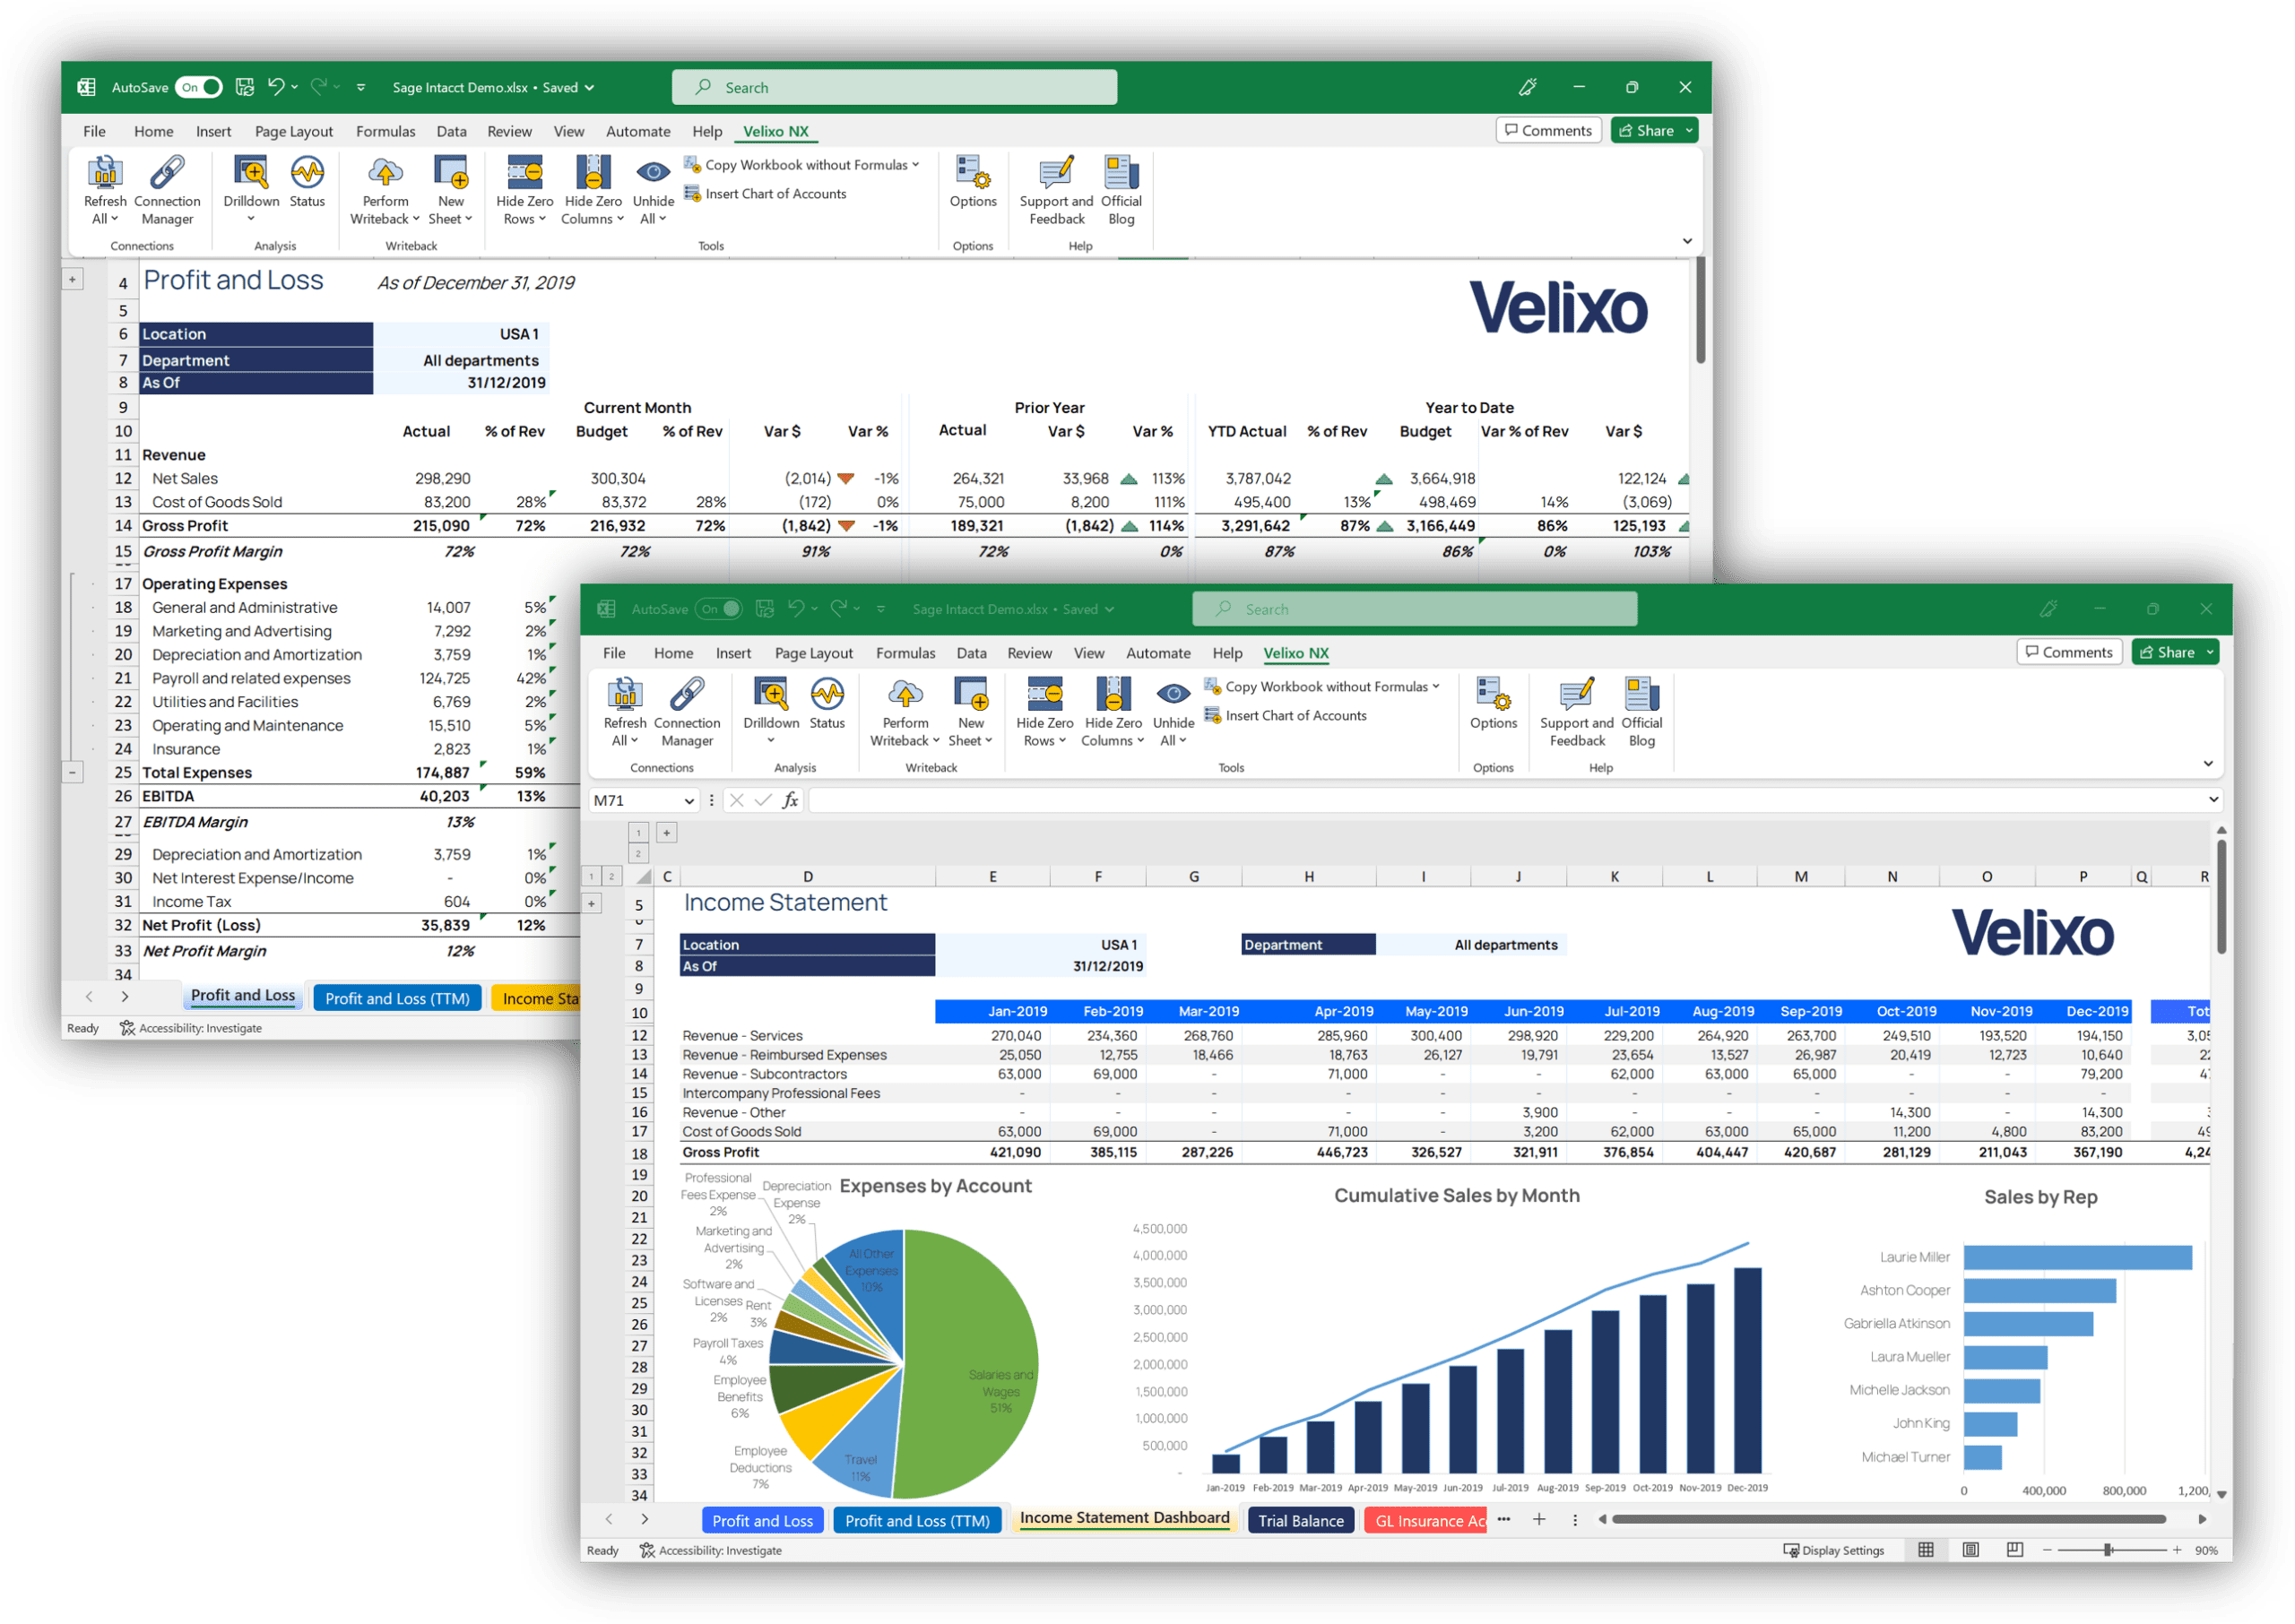 Excel Reporting Budgeting And Automation For Erps Velixo 4153